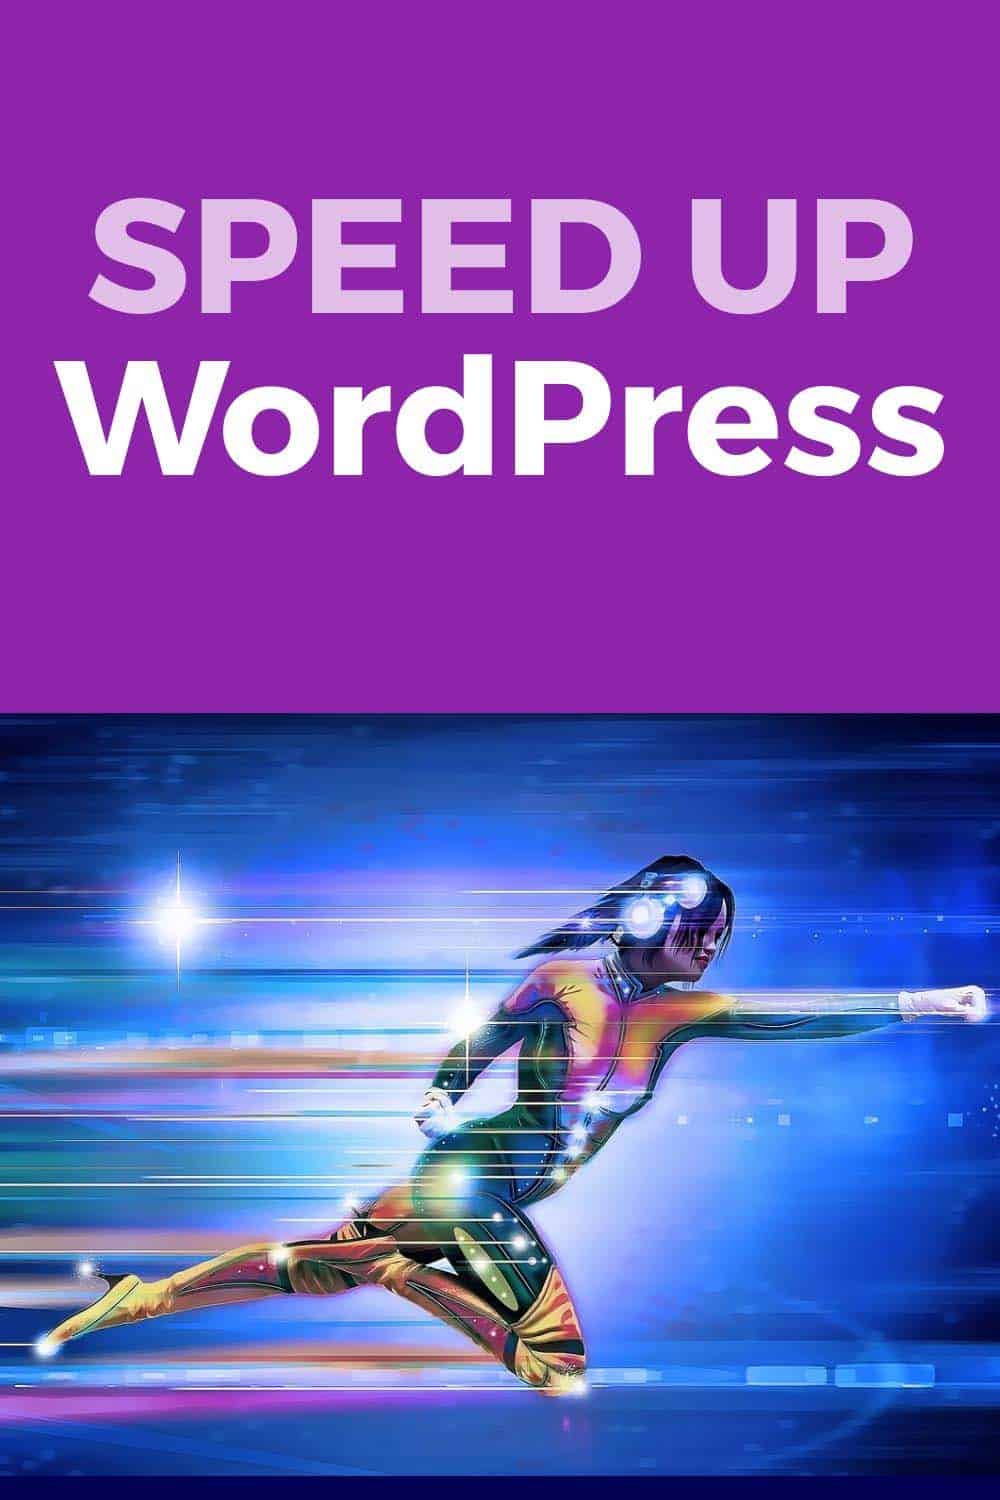 Speed Up WordPress with 15 GREAT Tips